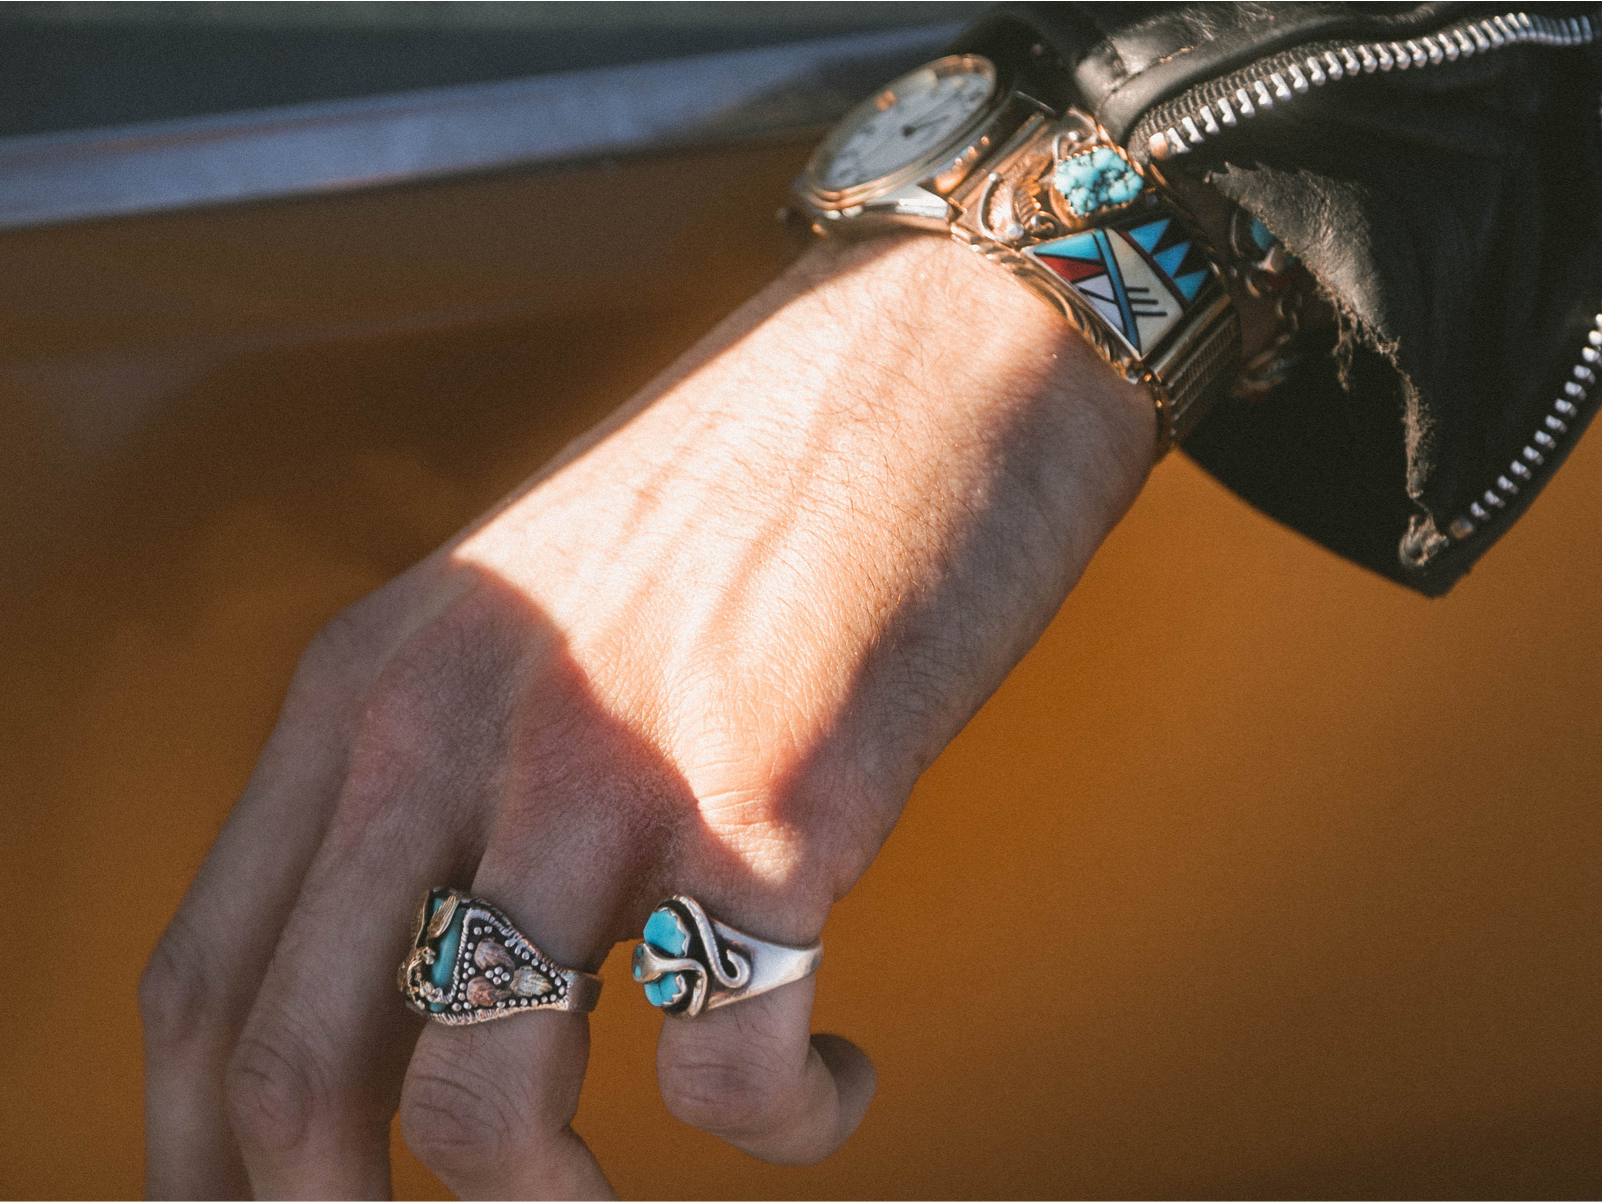 A woman's hand hanging outside of a yellow car window. She is wearing two silver rings with blue stones and intricate designs and a matching watch.